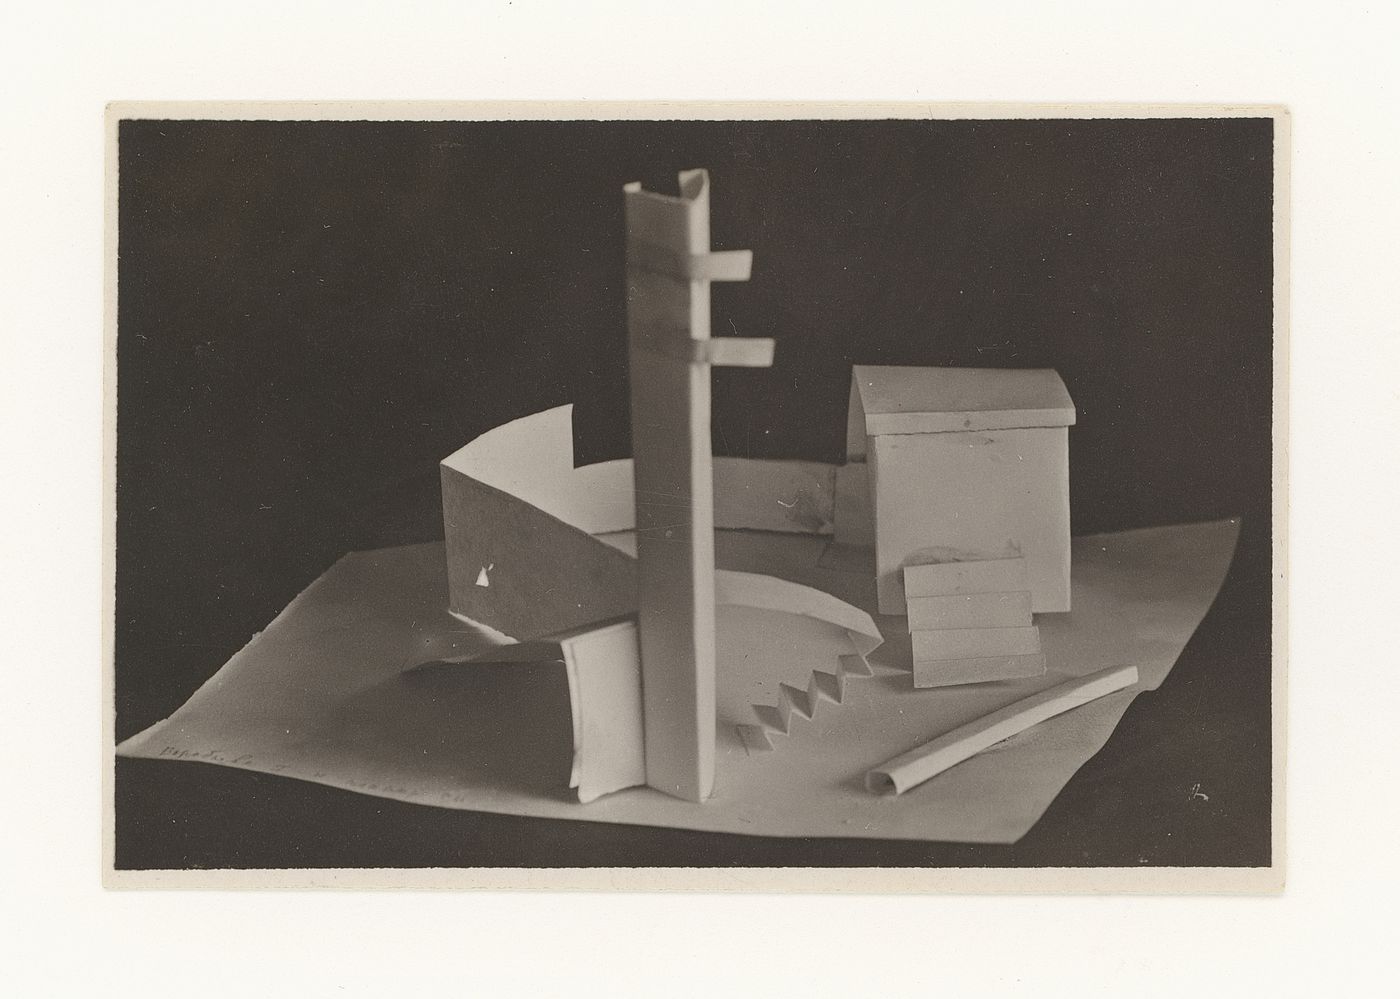 Photograph of a student model on the topic "Organization of Space in a Rectangular Area" for the "Space" course at the Vkhutemas (Higher State Artistic Technical Studios), Moscow